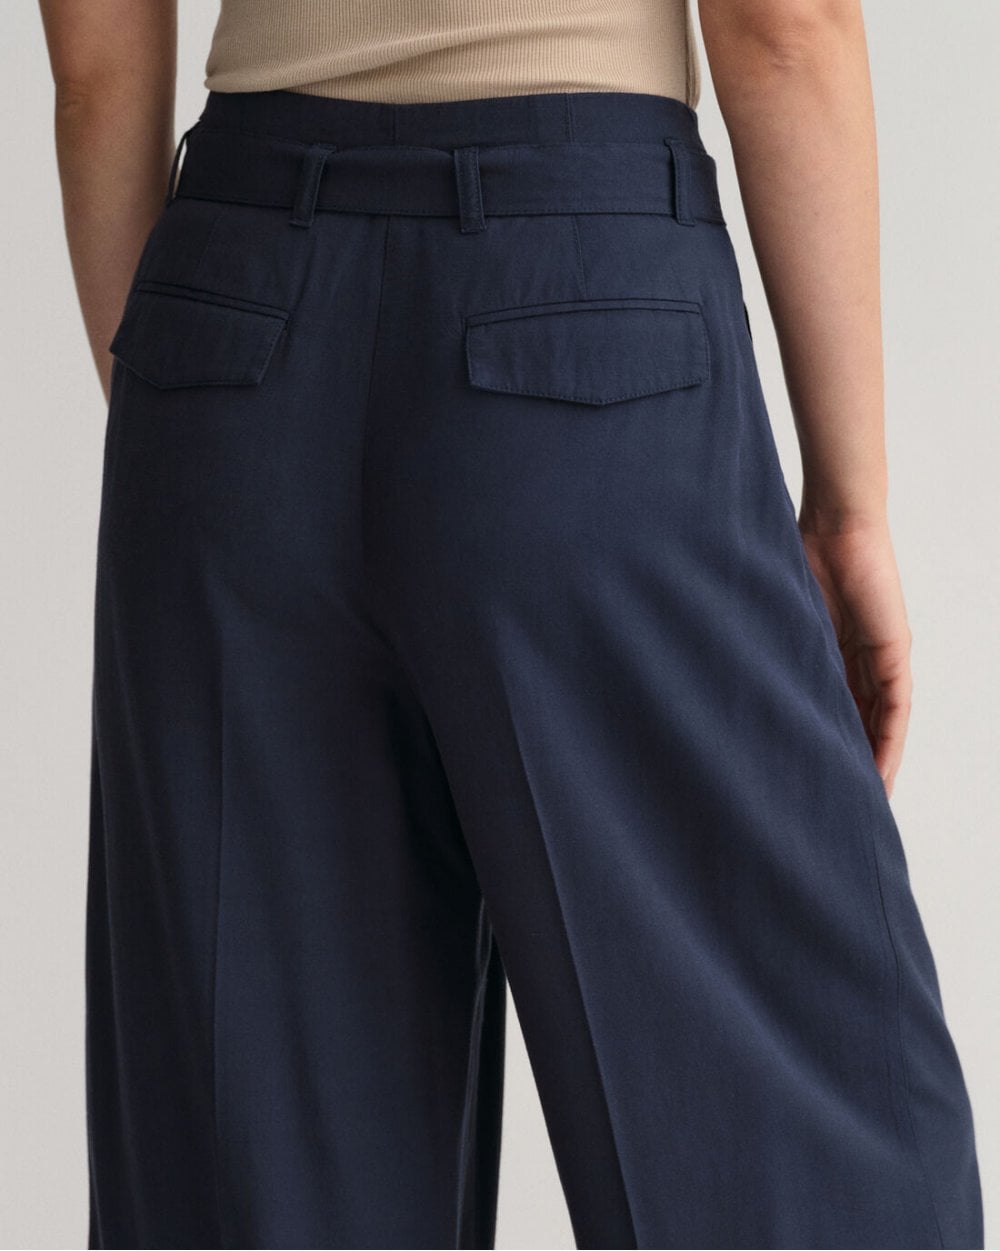 Wide Legged Cropped Belted Pants